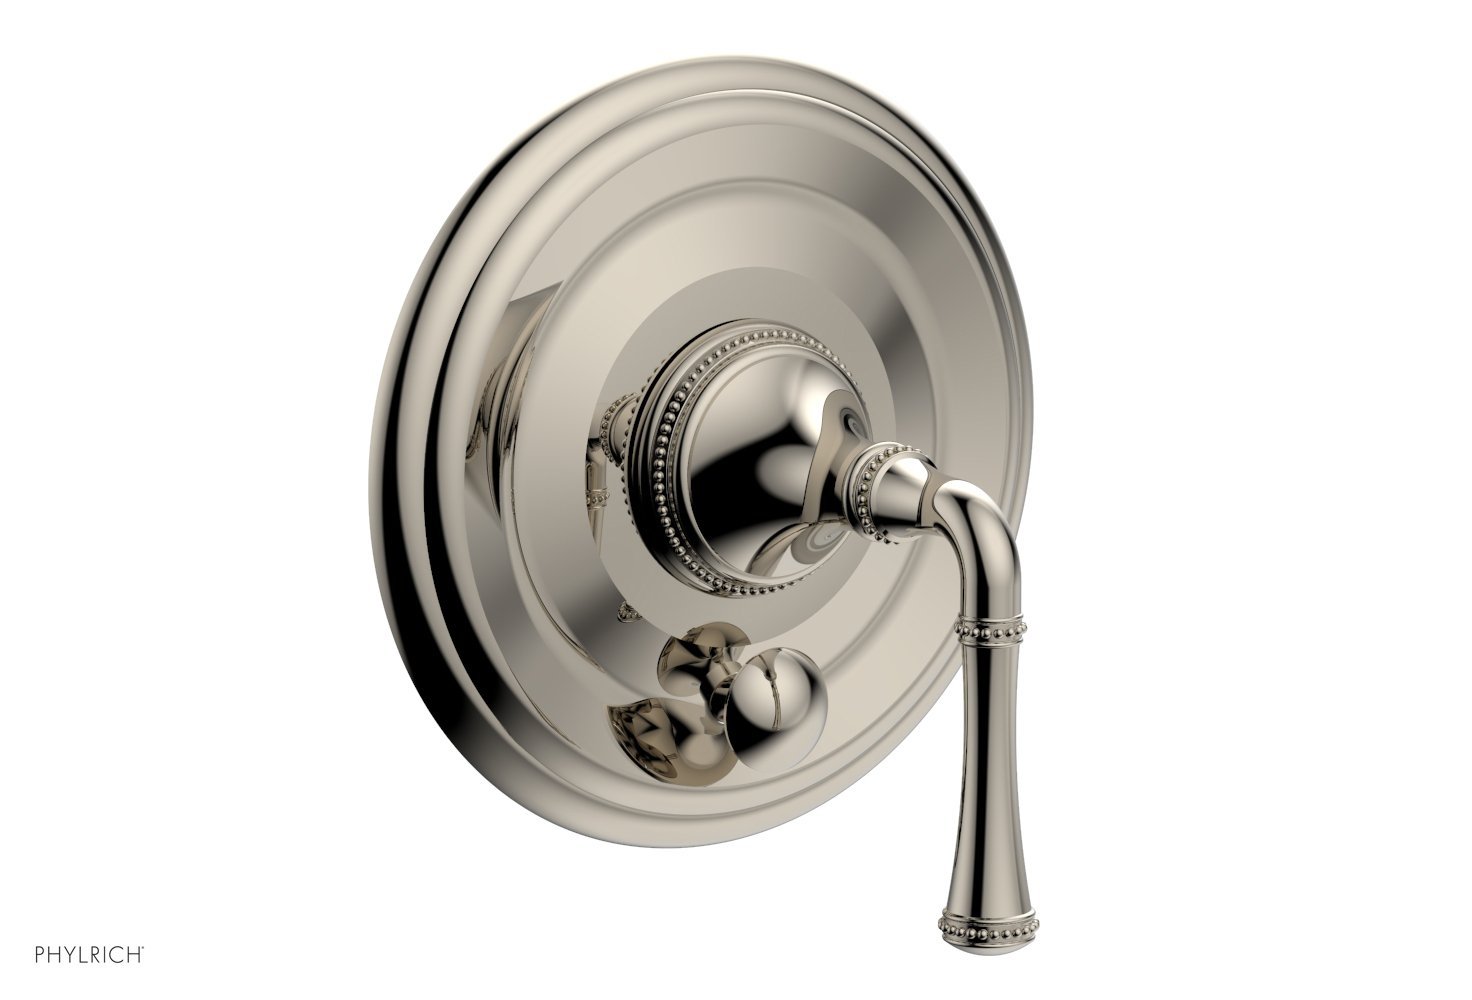 PHYLRICH 4-129/014 BEADED WALL MOUNT PRESSURE BALANCE SHOWER PLATE WITH DIVERTER AND LEVER HANDLE